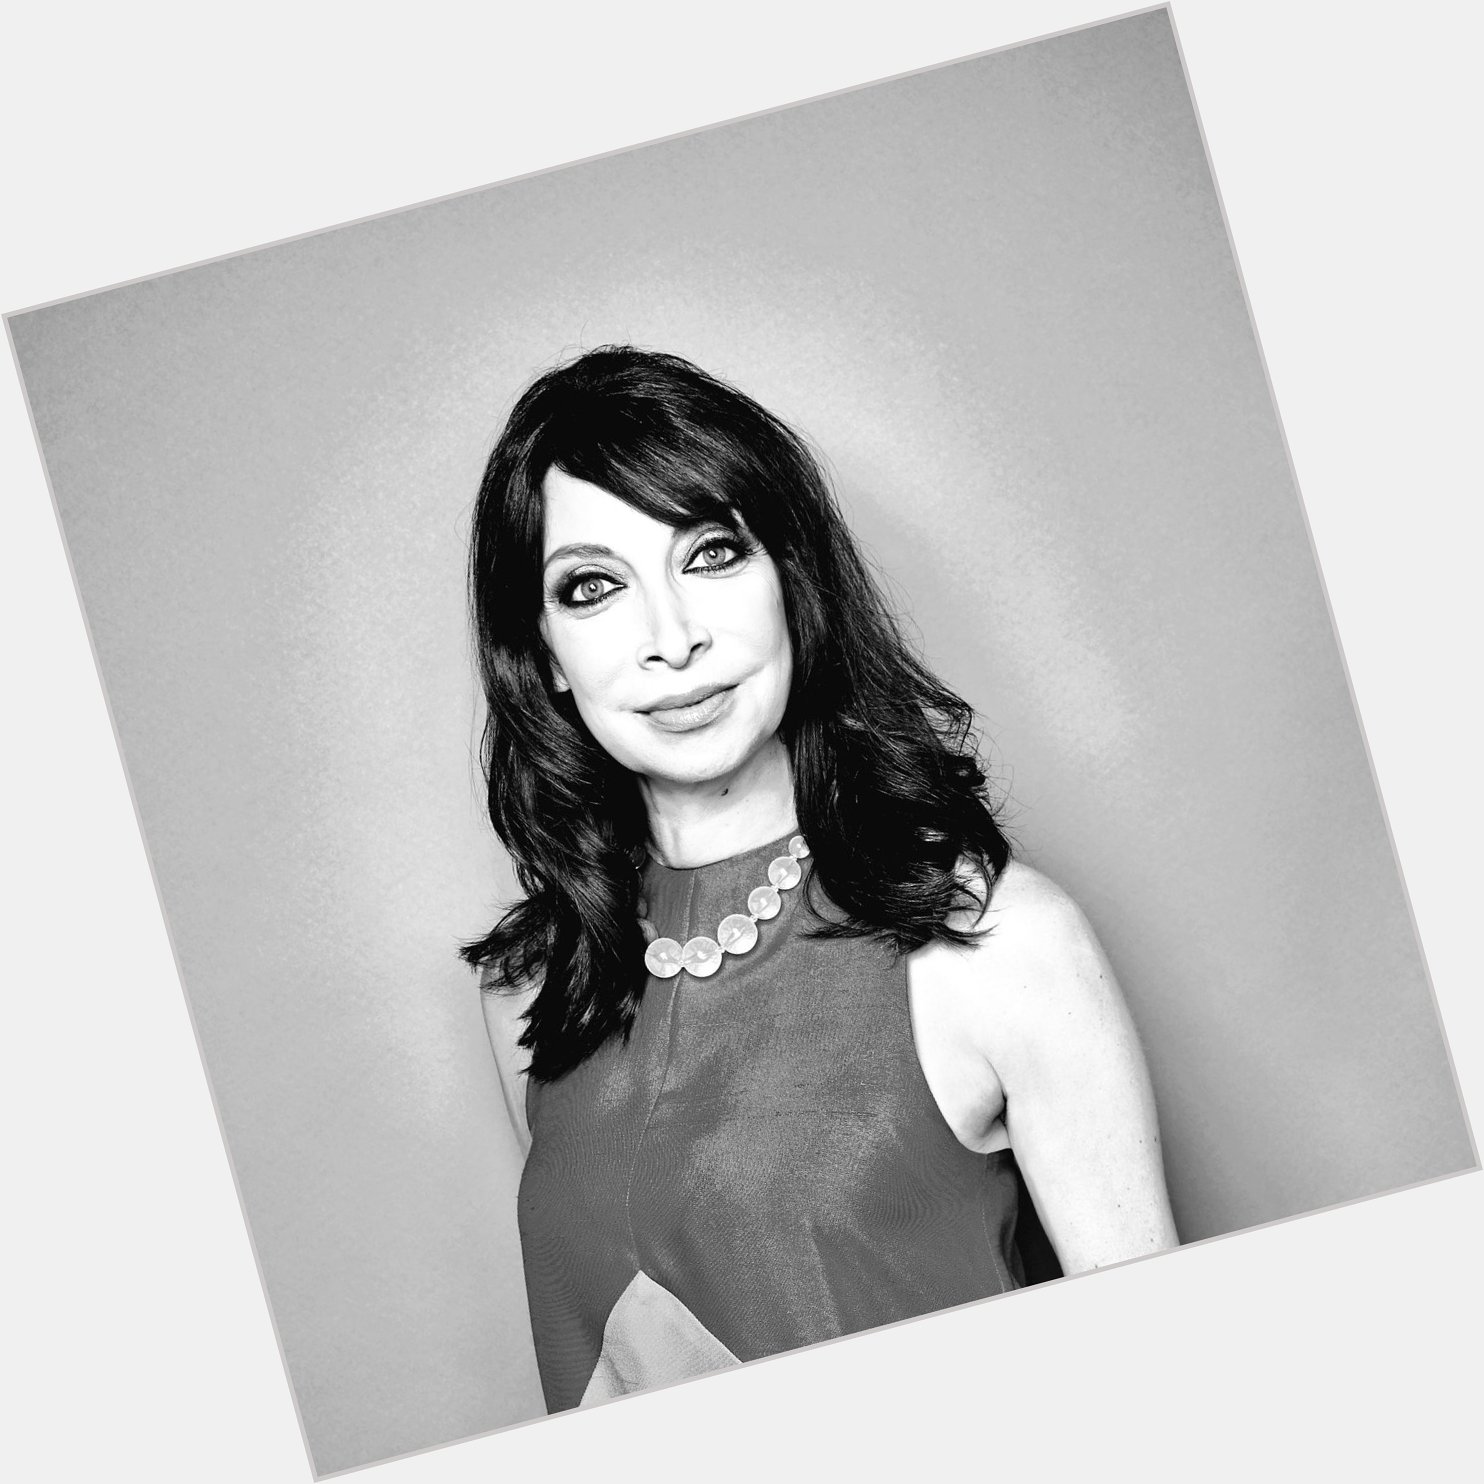 Team wishes a happy birthday to one of our fave people/guests, the talented Illeana Douglas! 